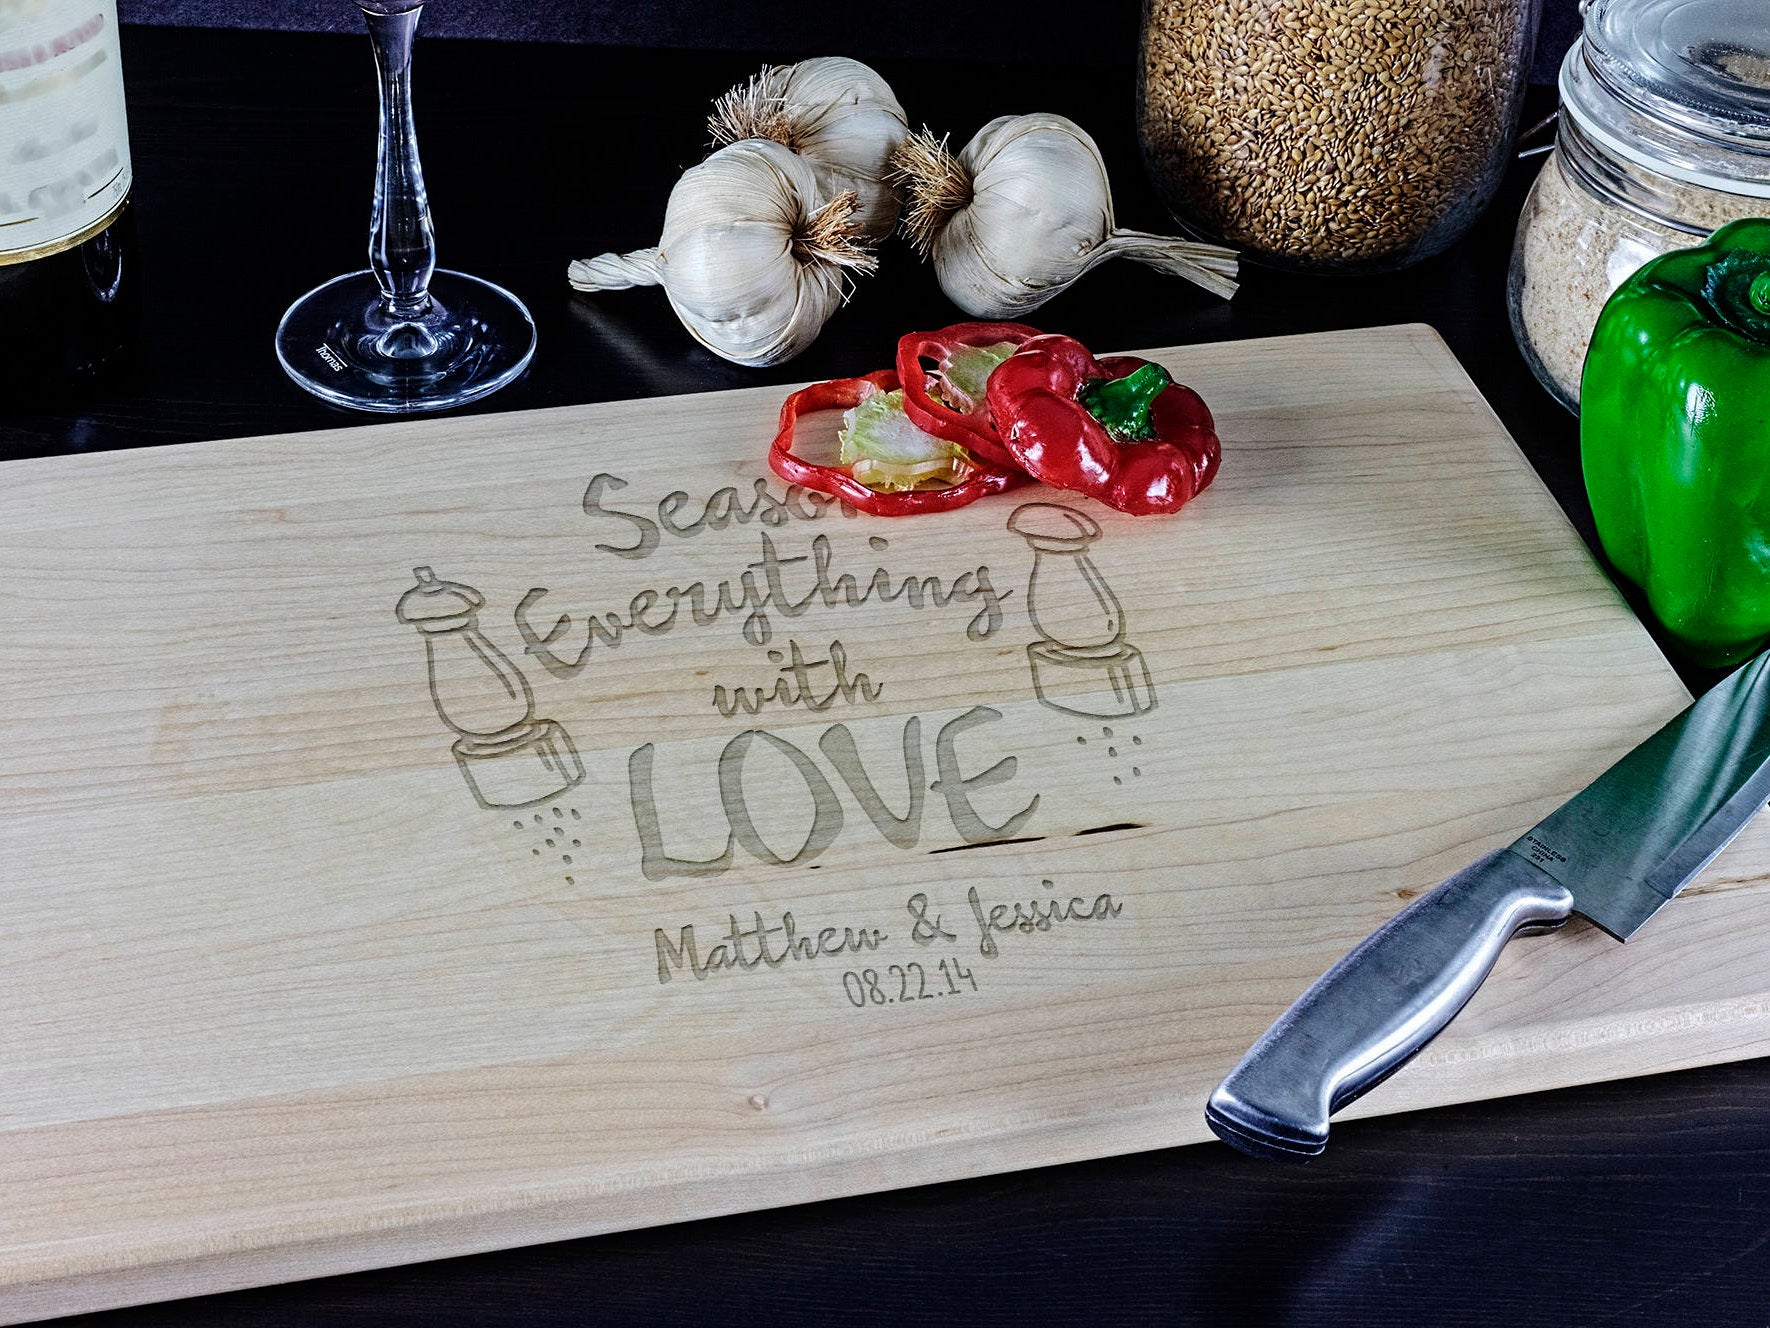 Personalized 12x17 Cutting Board - Key To Our Home